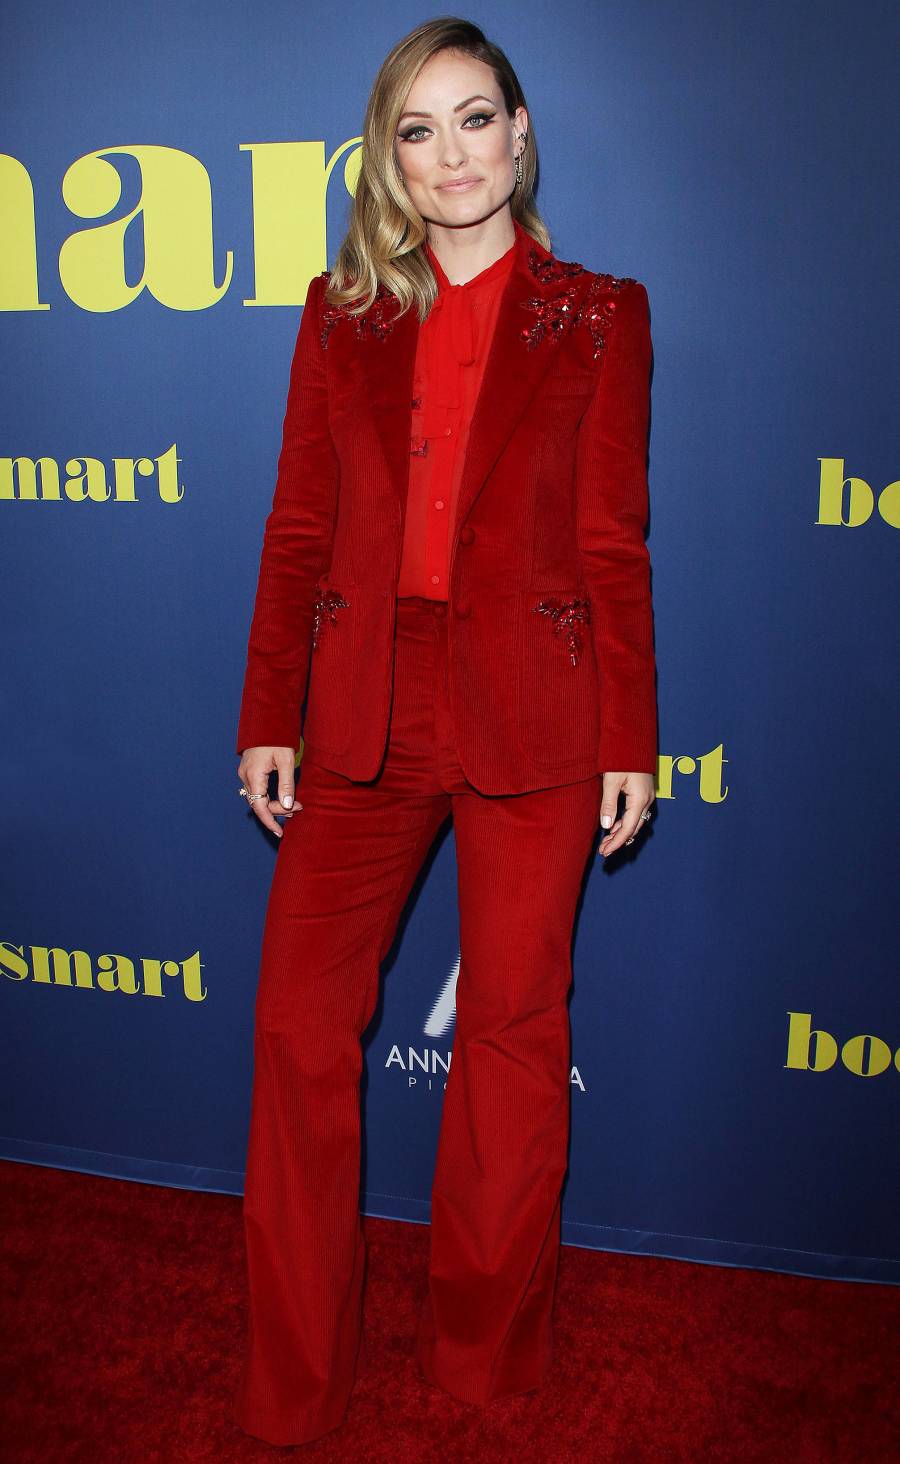 Celebs Wearing Red Suits - Olivia Wilde May 13, 2019